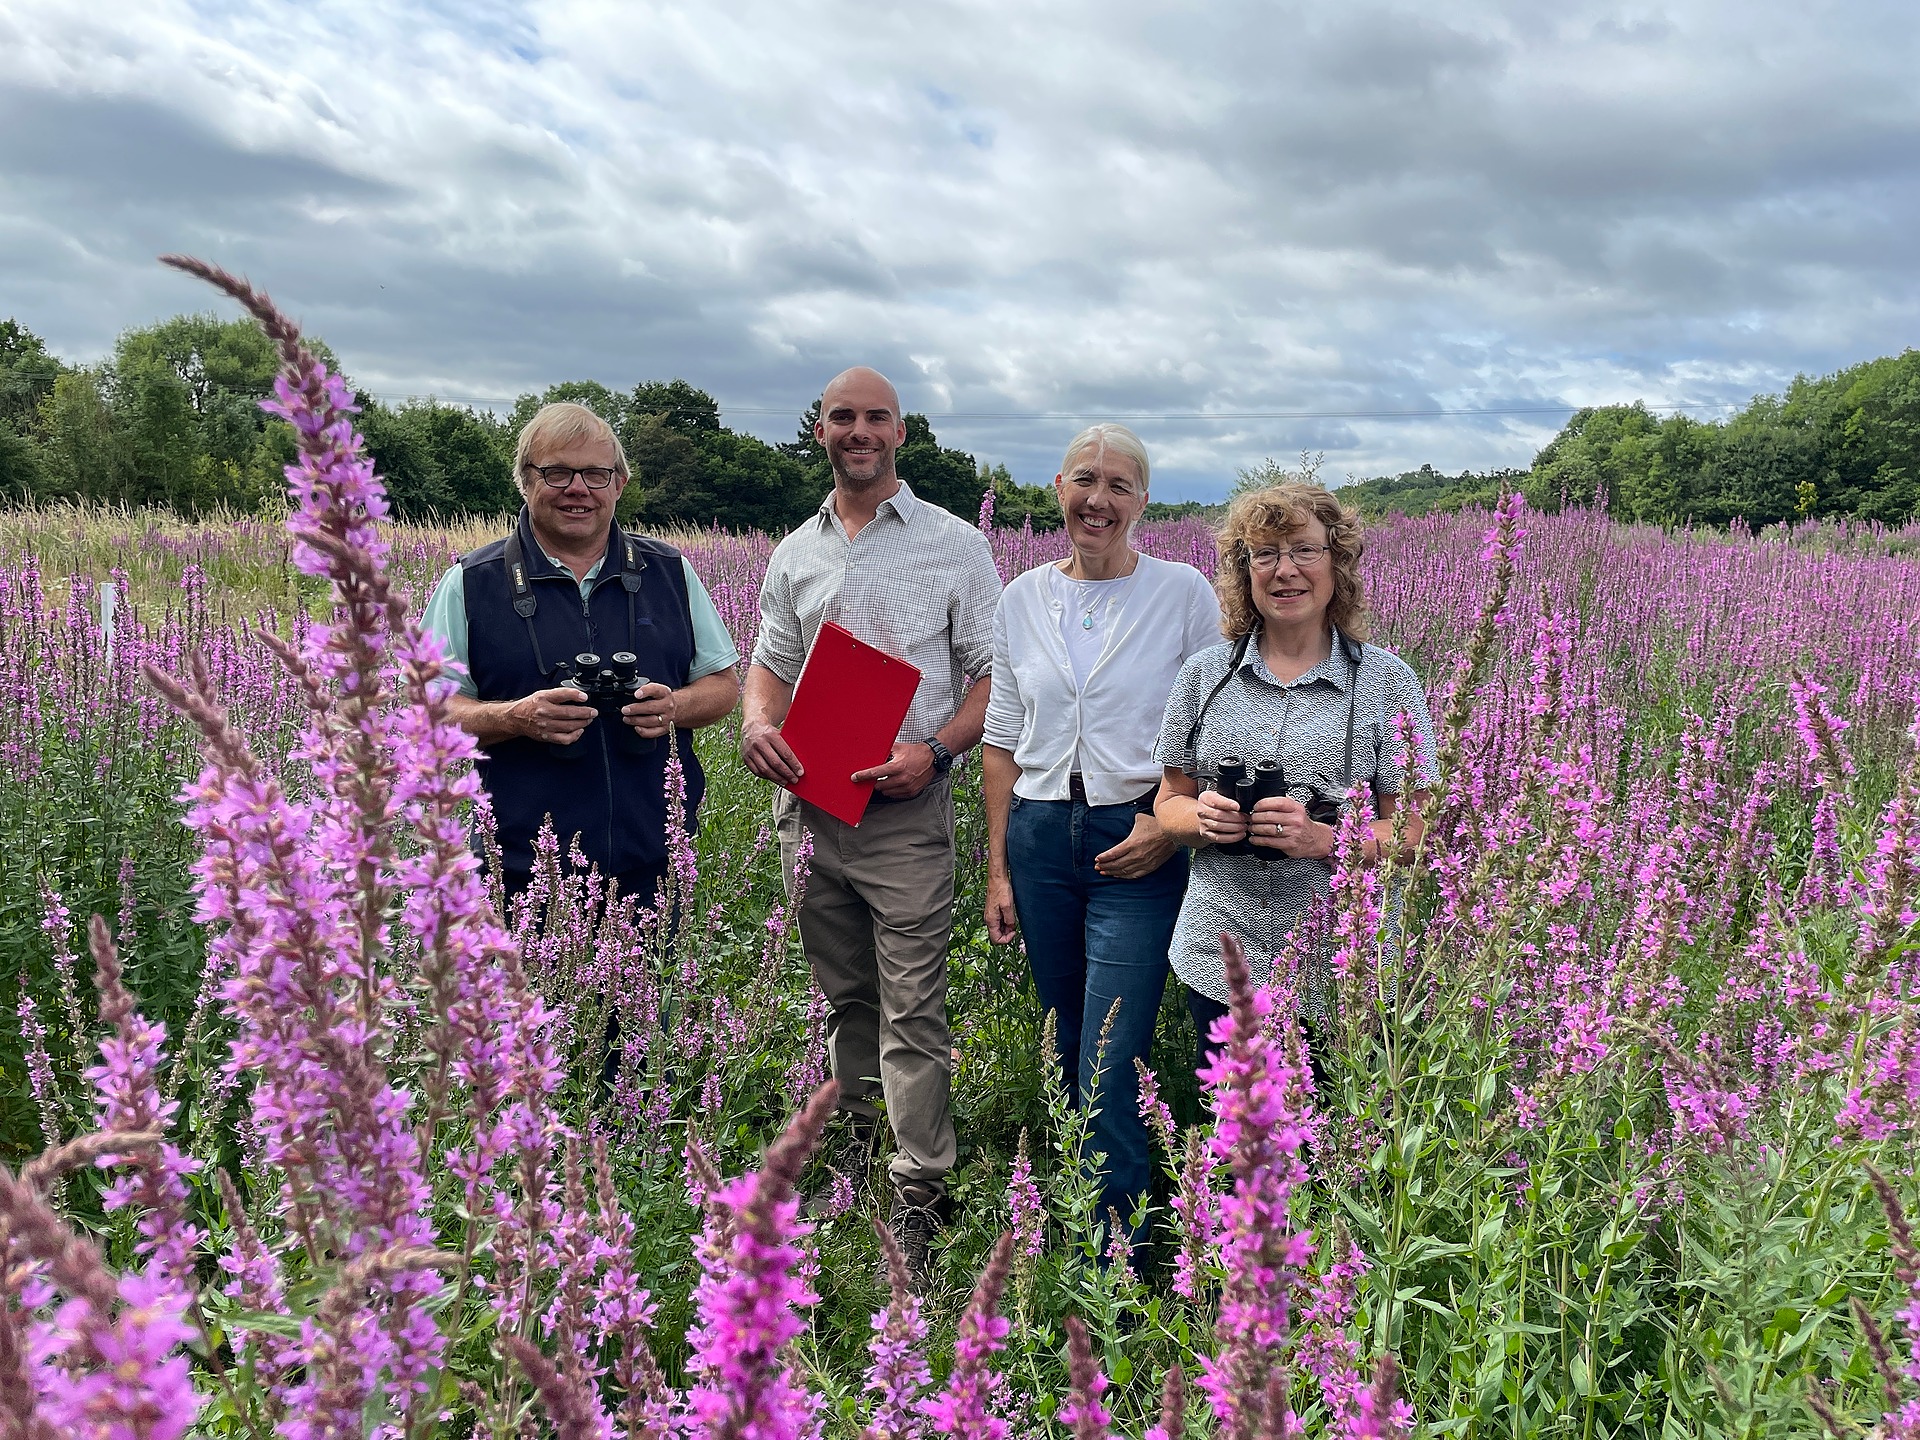 NEWS | Malvern Hills District Council has joined forces with the RSPB to improve biodiversity and protect vulnerable bird species at a meadow in Hallow